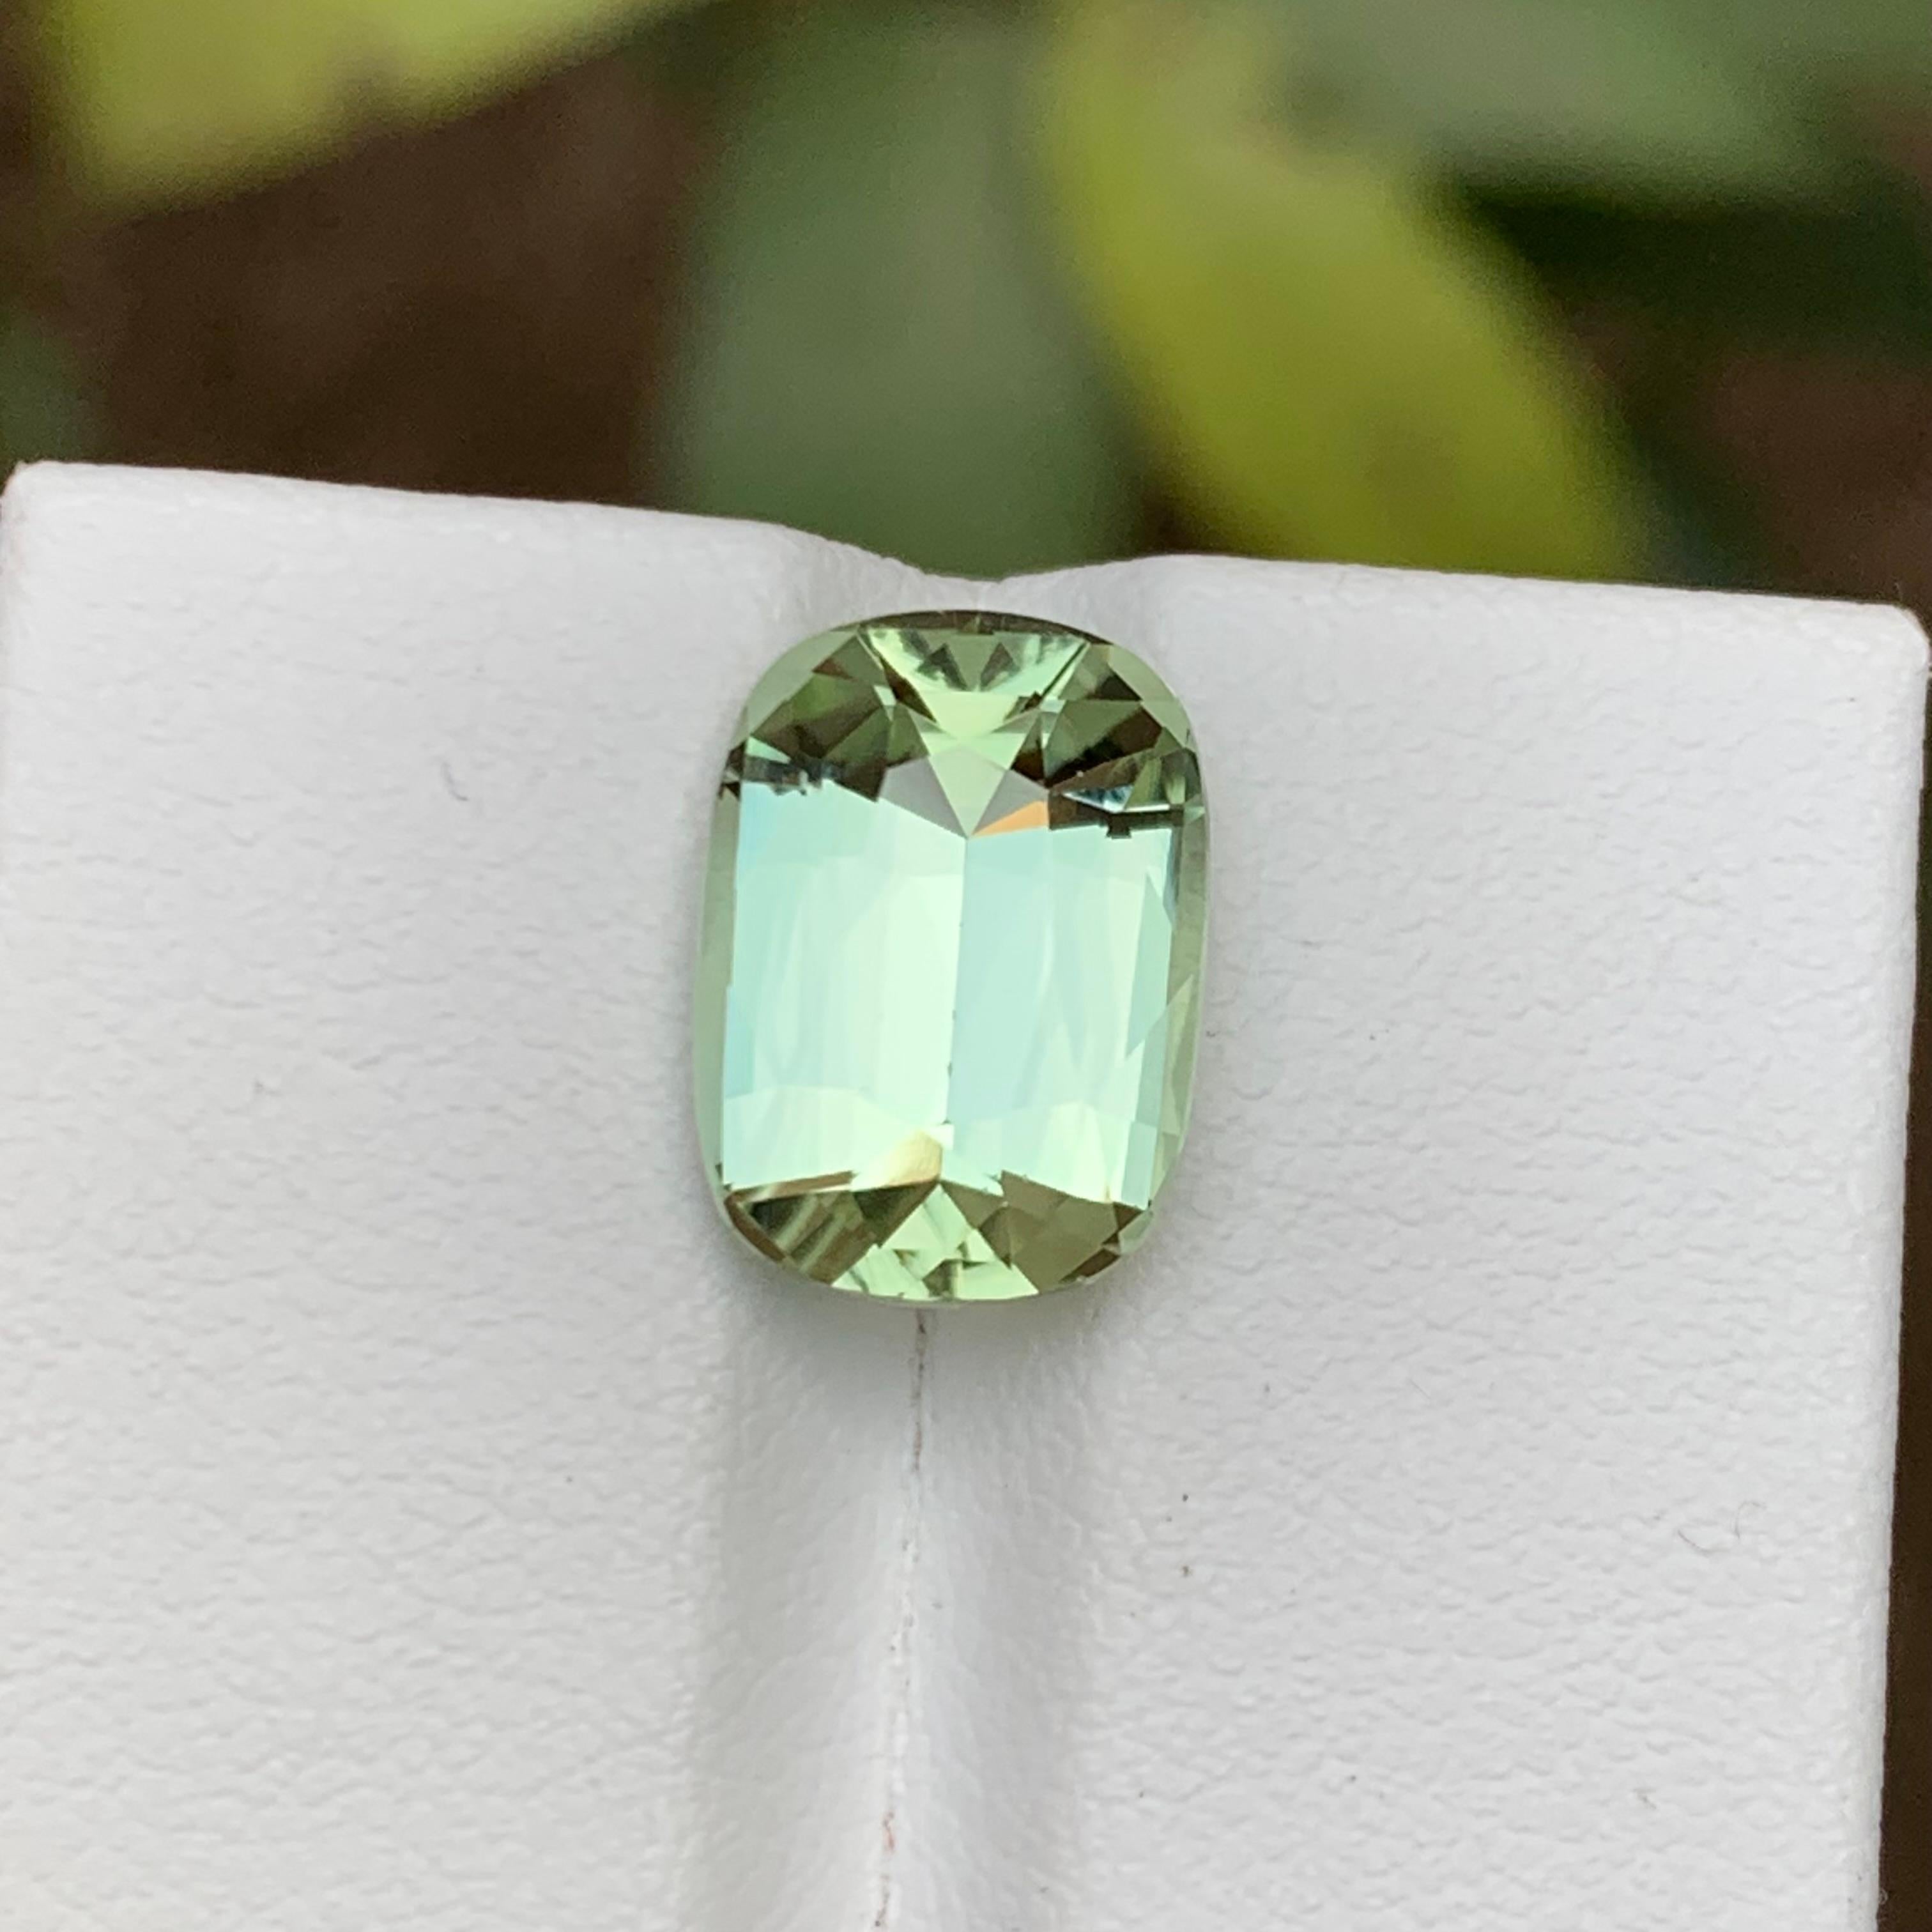 Pale Green Natural Tourmaline Gemstone 5.35 Ct Step Cushion Cut for Ring/Pendant For Sale 4